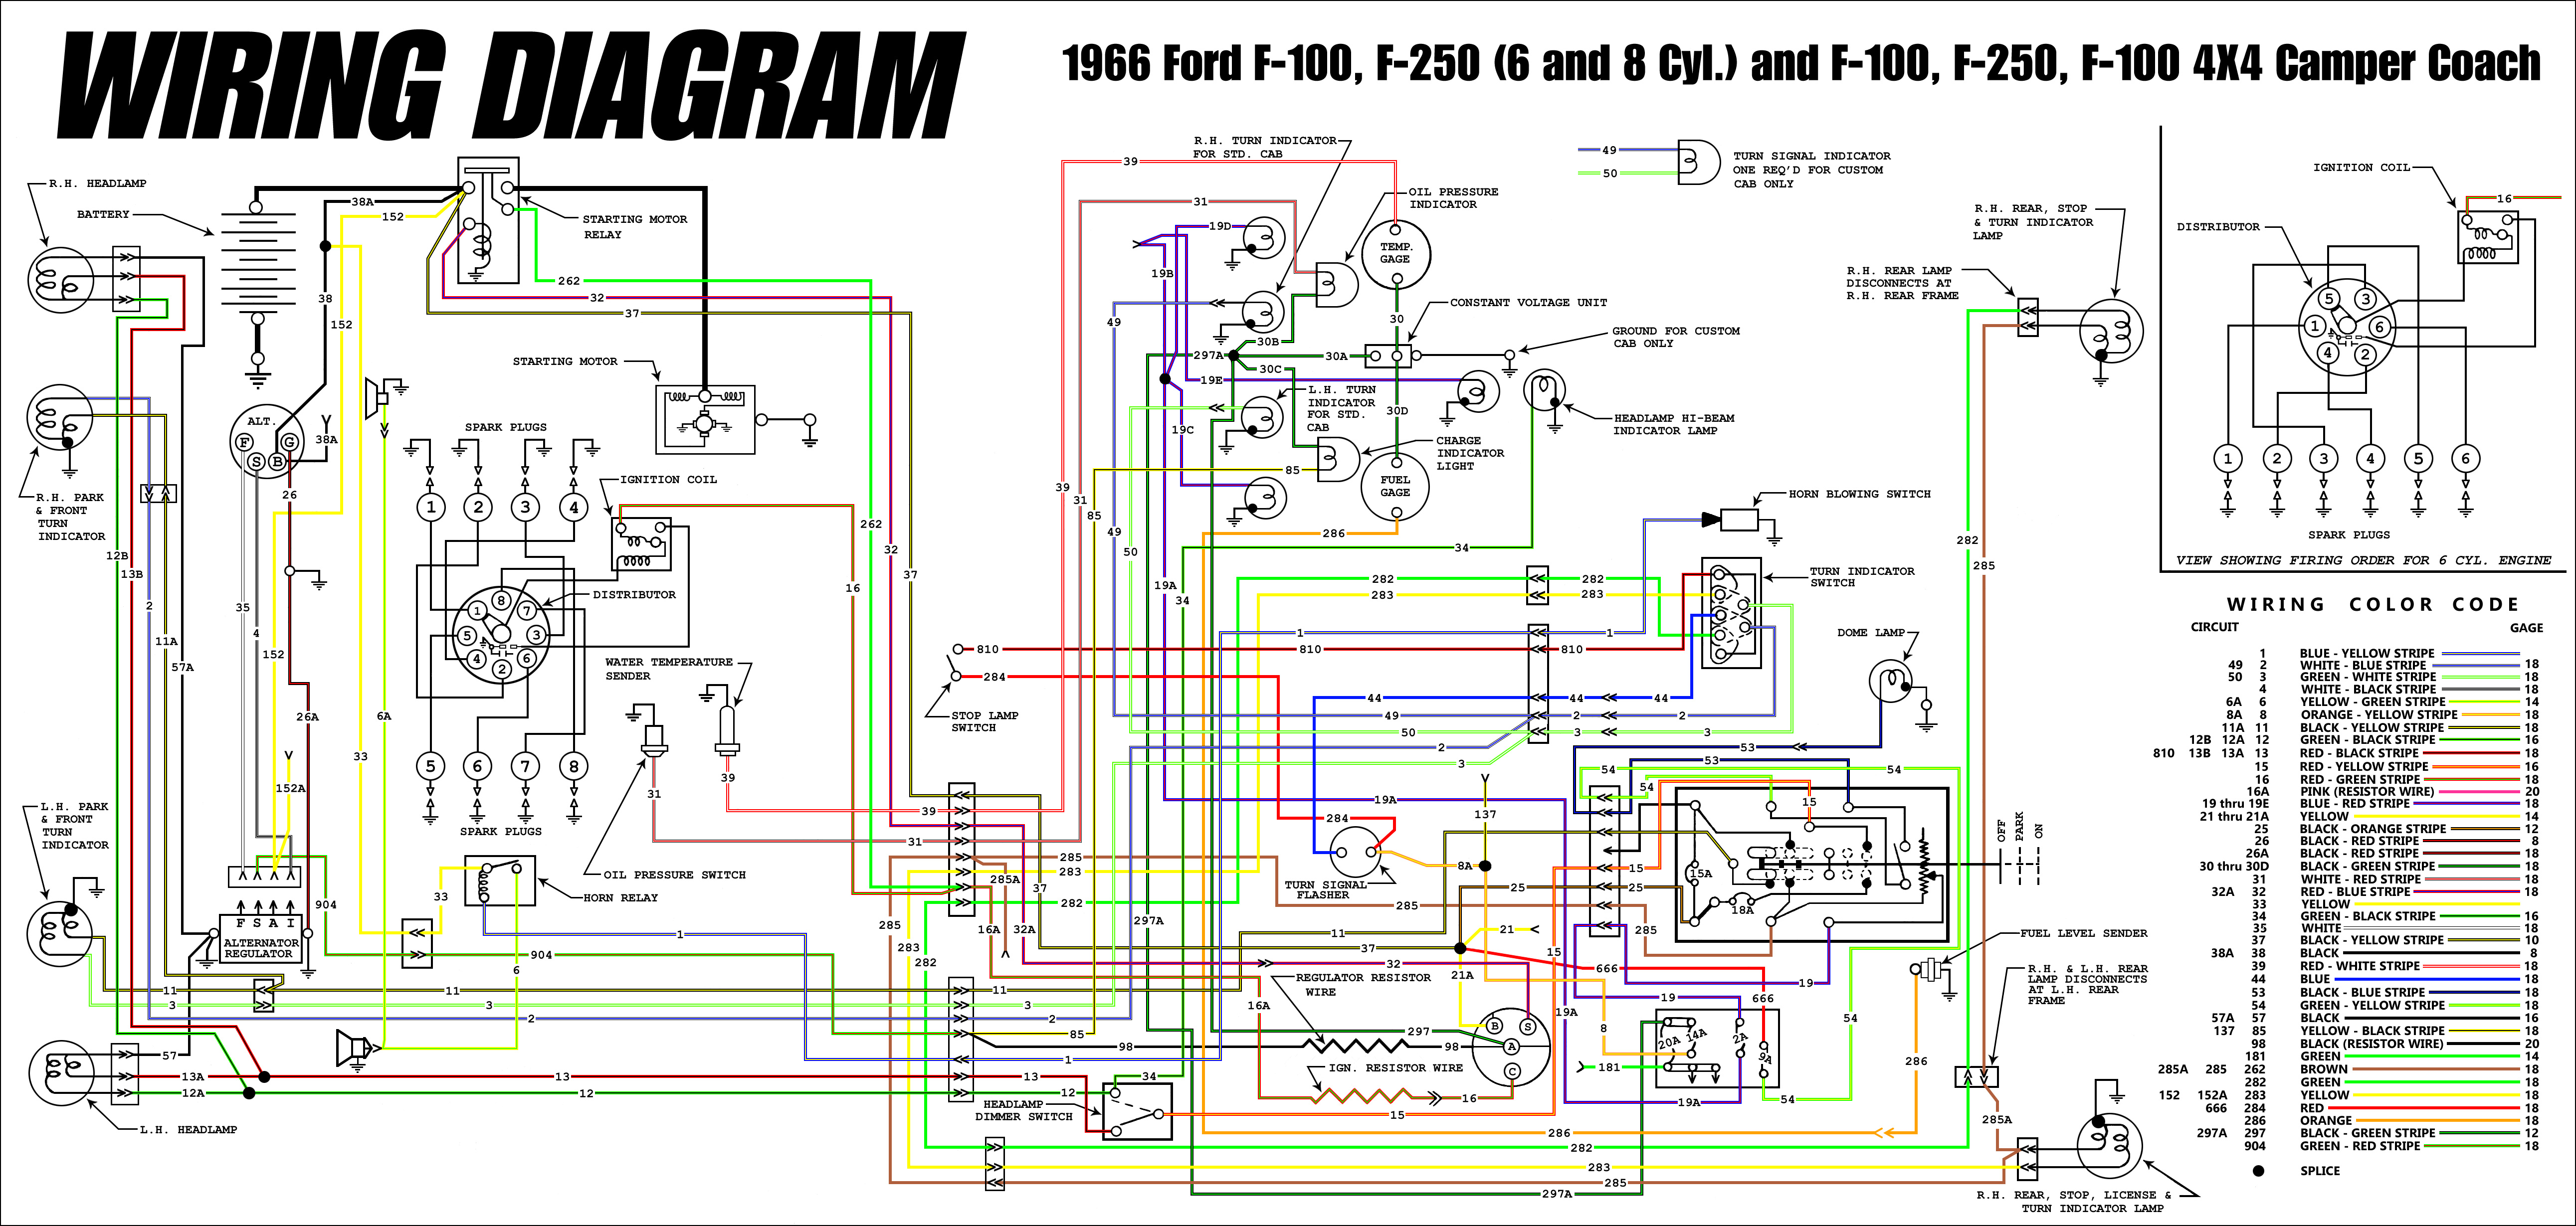 Taco Cartridge Circulator 007 F5 Wiring Diagram from fordification.info